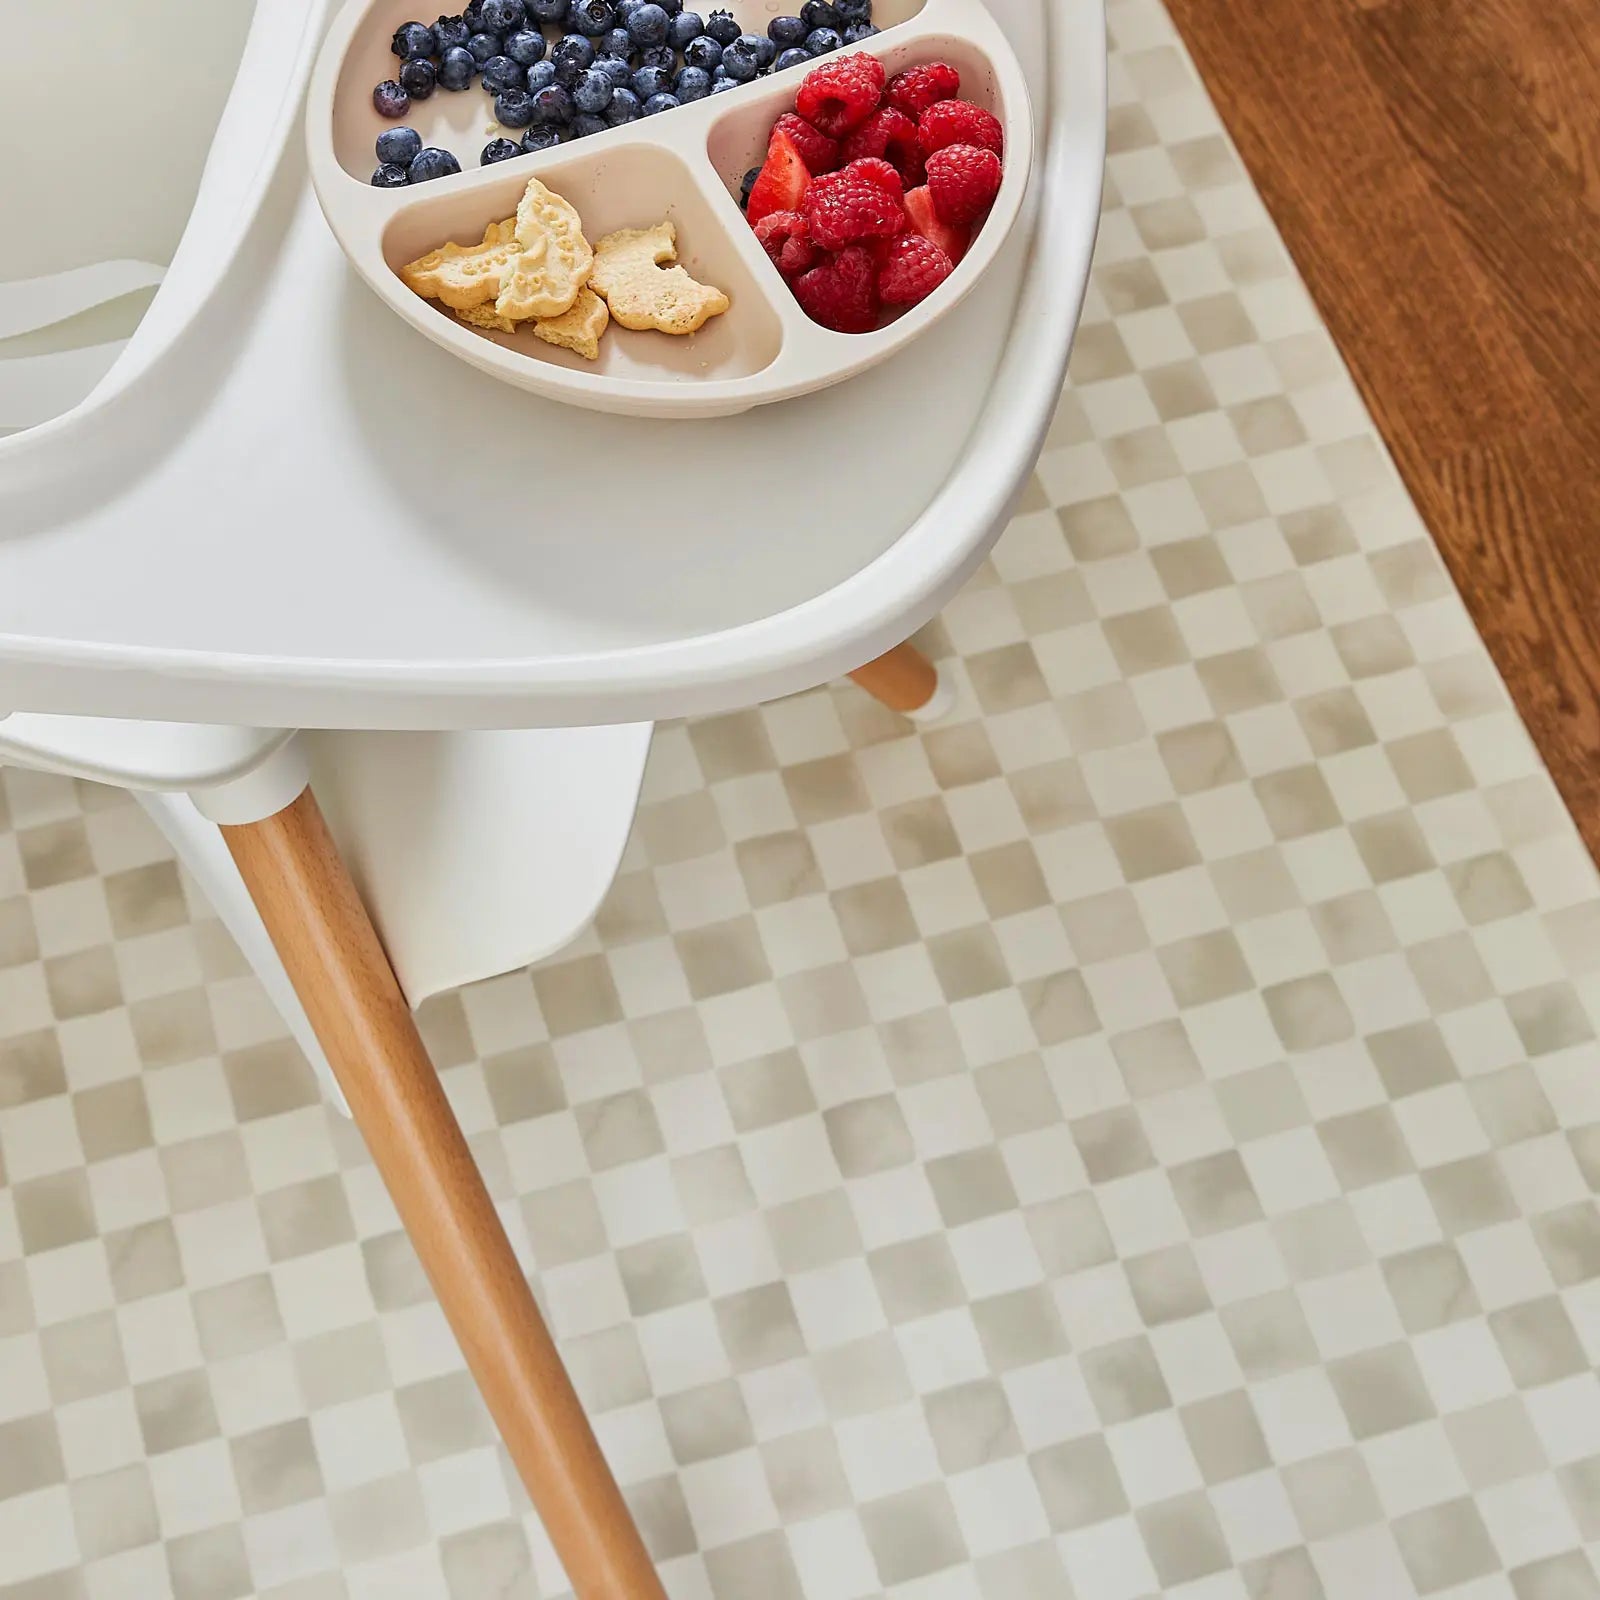 Checker almond beige geometric print high chair mat shown beneath a highchair with fruit and cookies on the tray